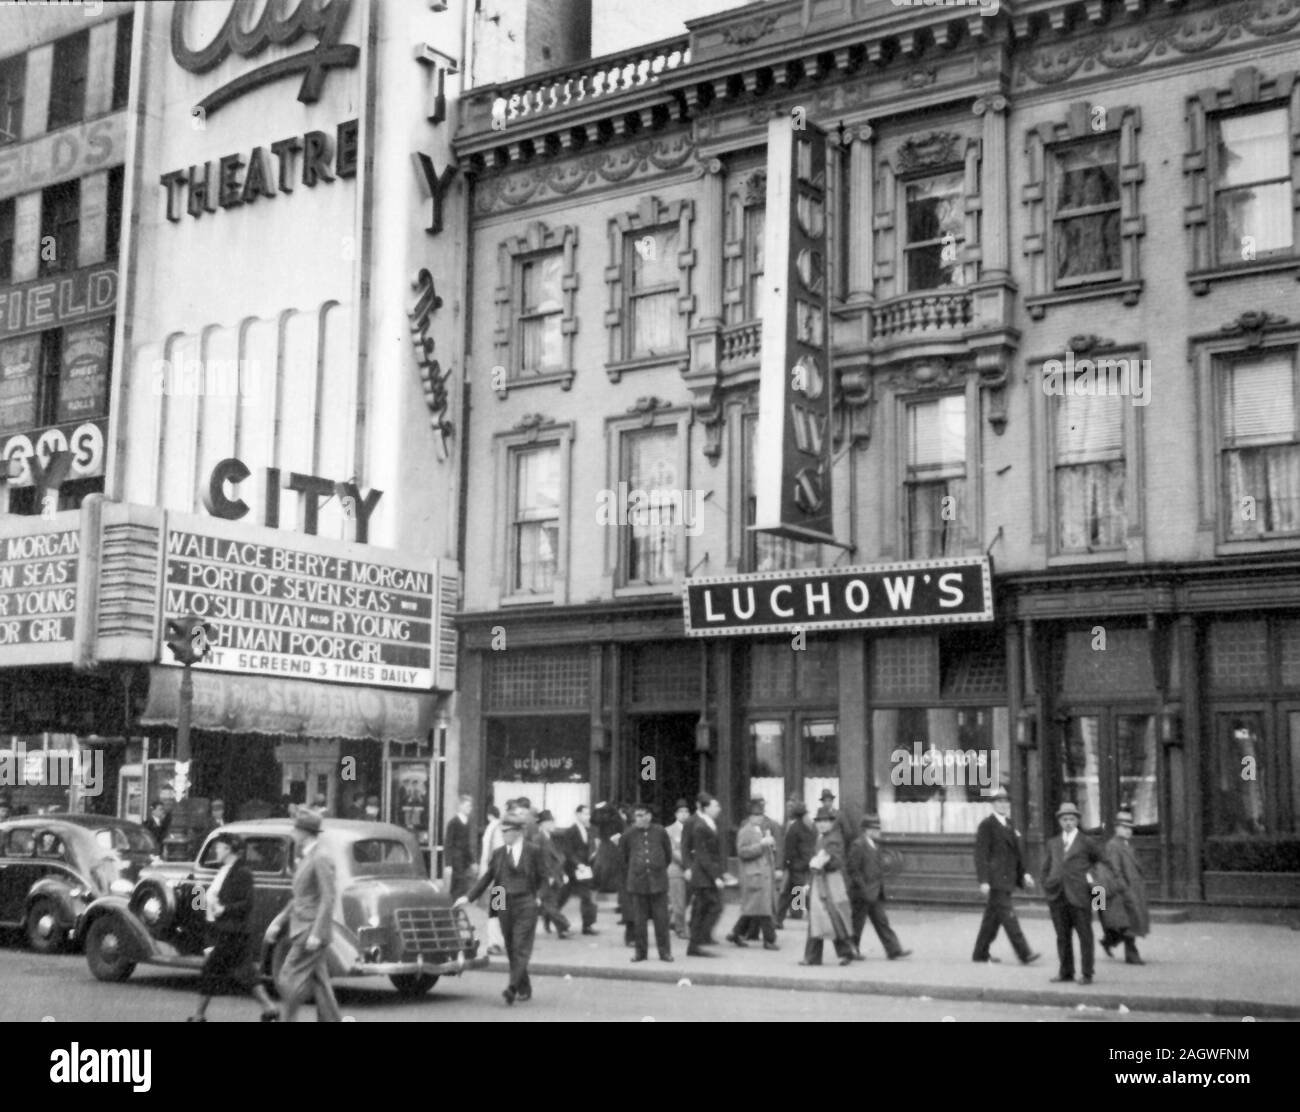 Pedestrians fill walk in front of Luchow's Restaurant, the City Theater next door features Wallace Beery and Margaret O'Sullivan films. Stock Photo